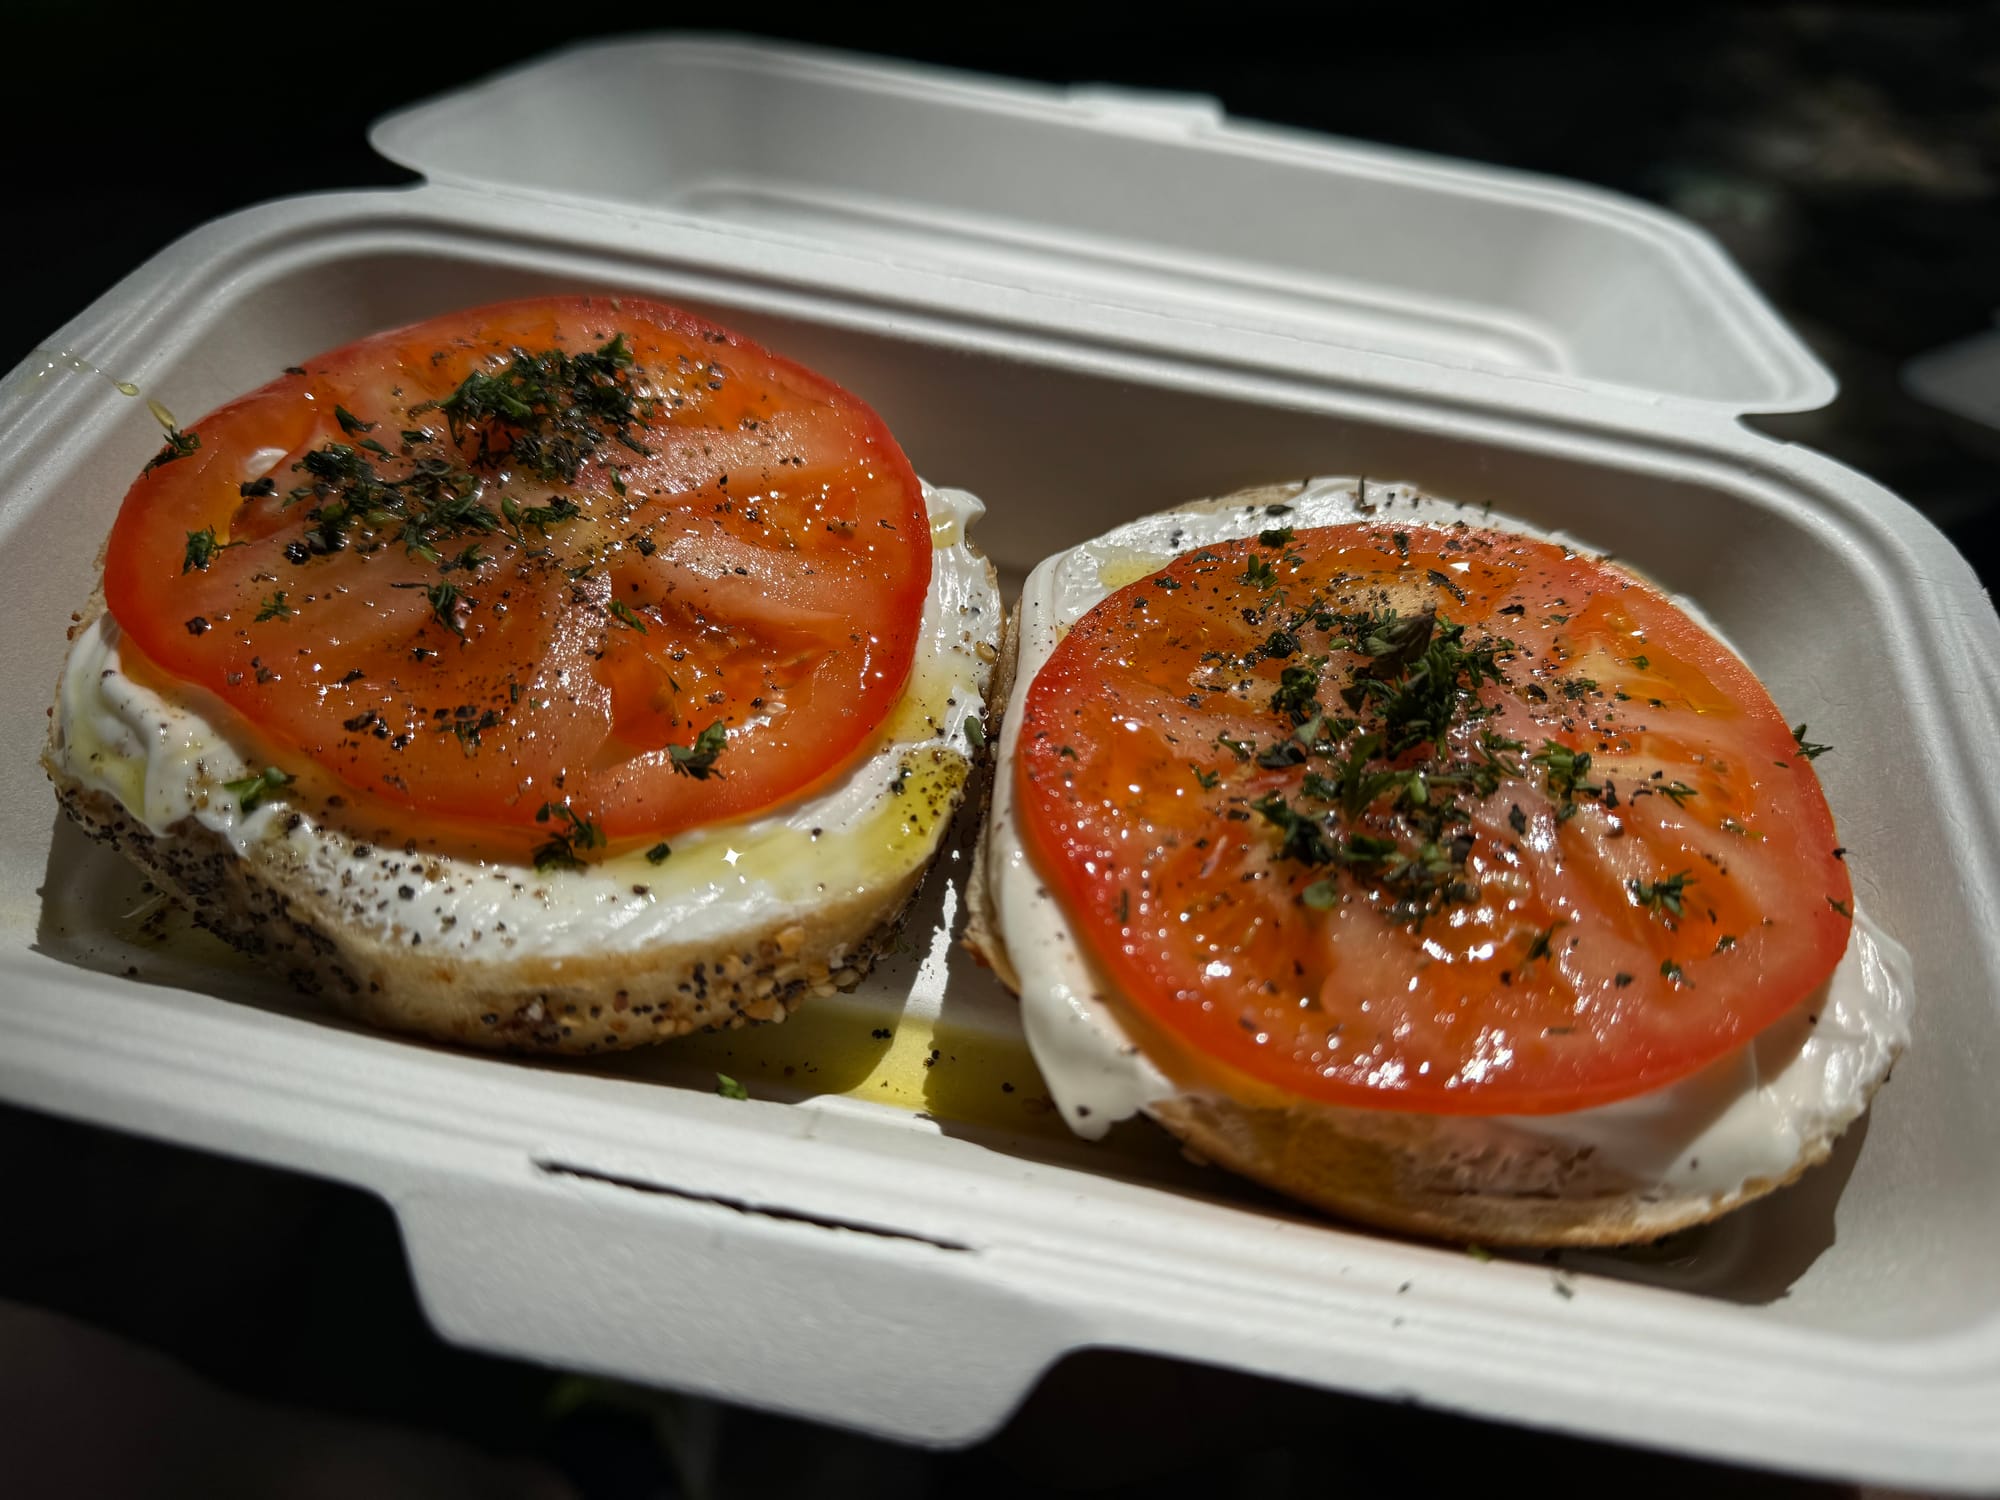 The open faced Georgia's Heirloom bagel from Papo's.